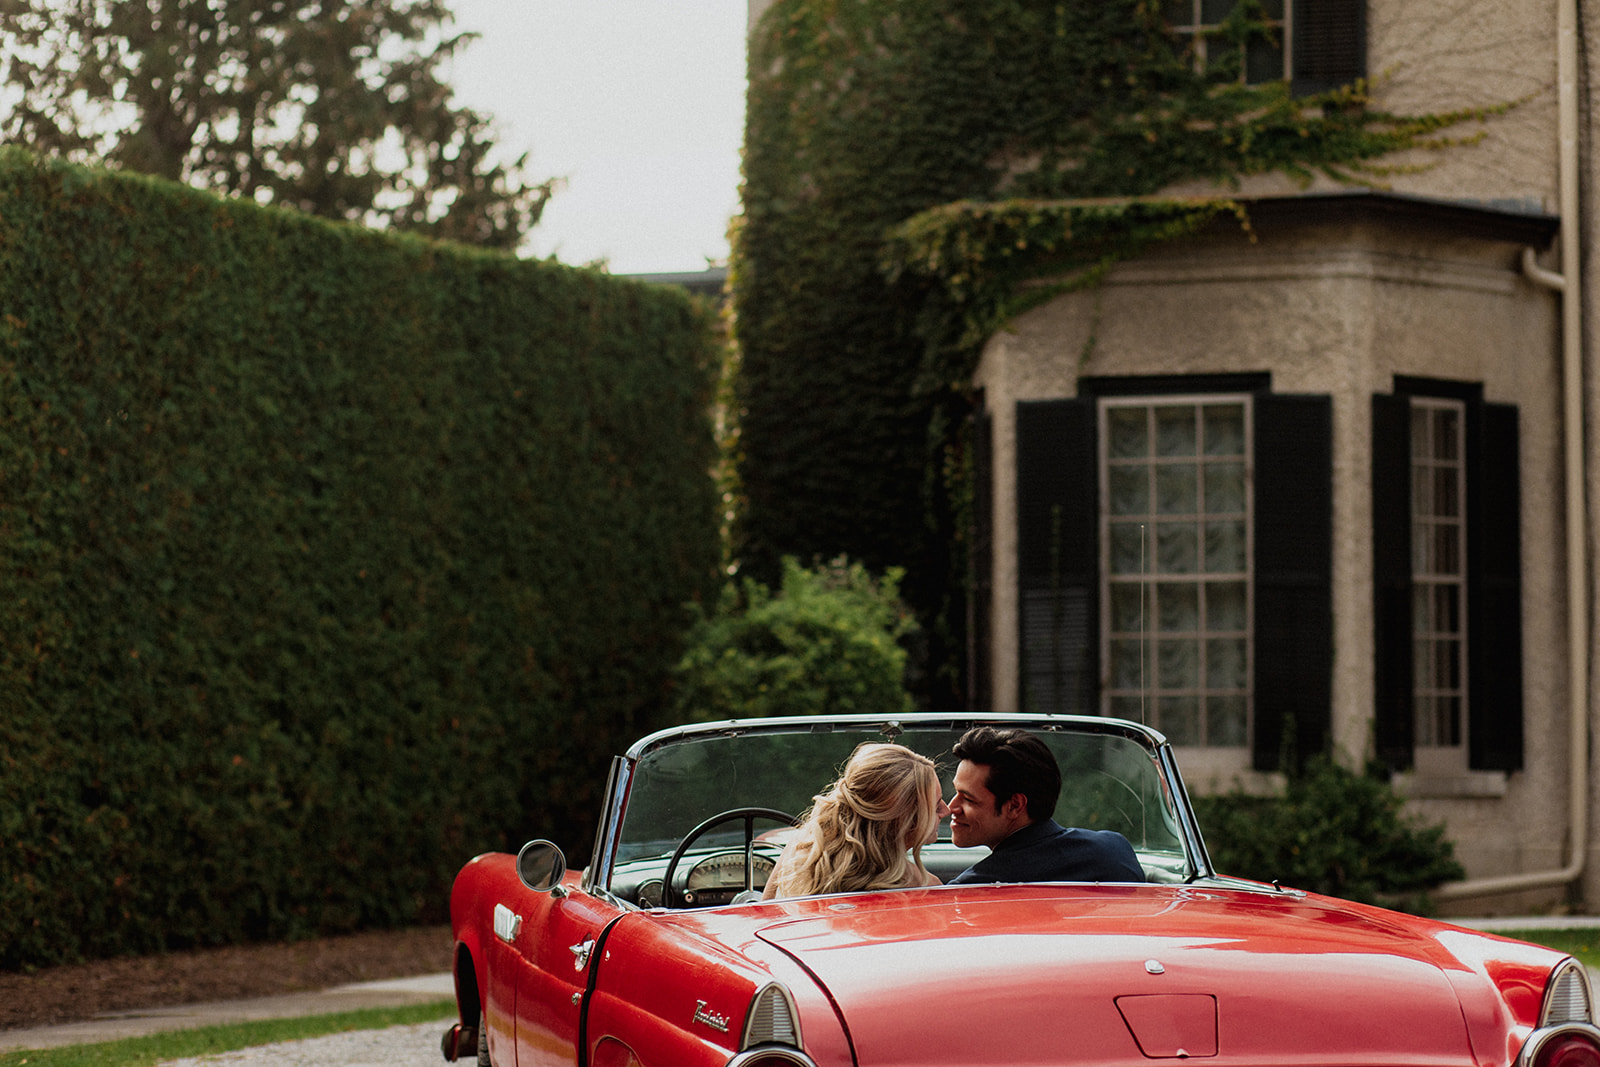 A couple shares a moment in a classic red convertible parked beside a lush green hedge near a stately building.